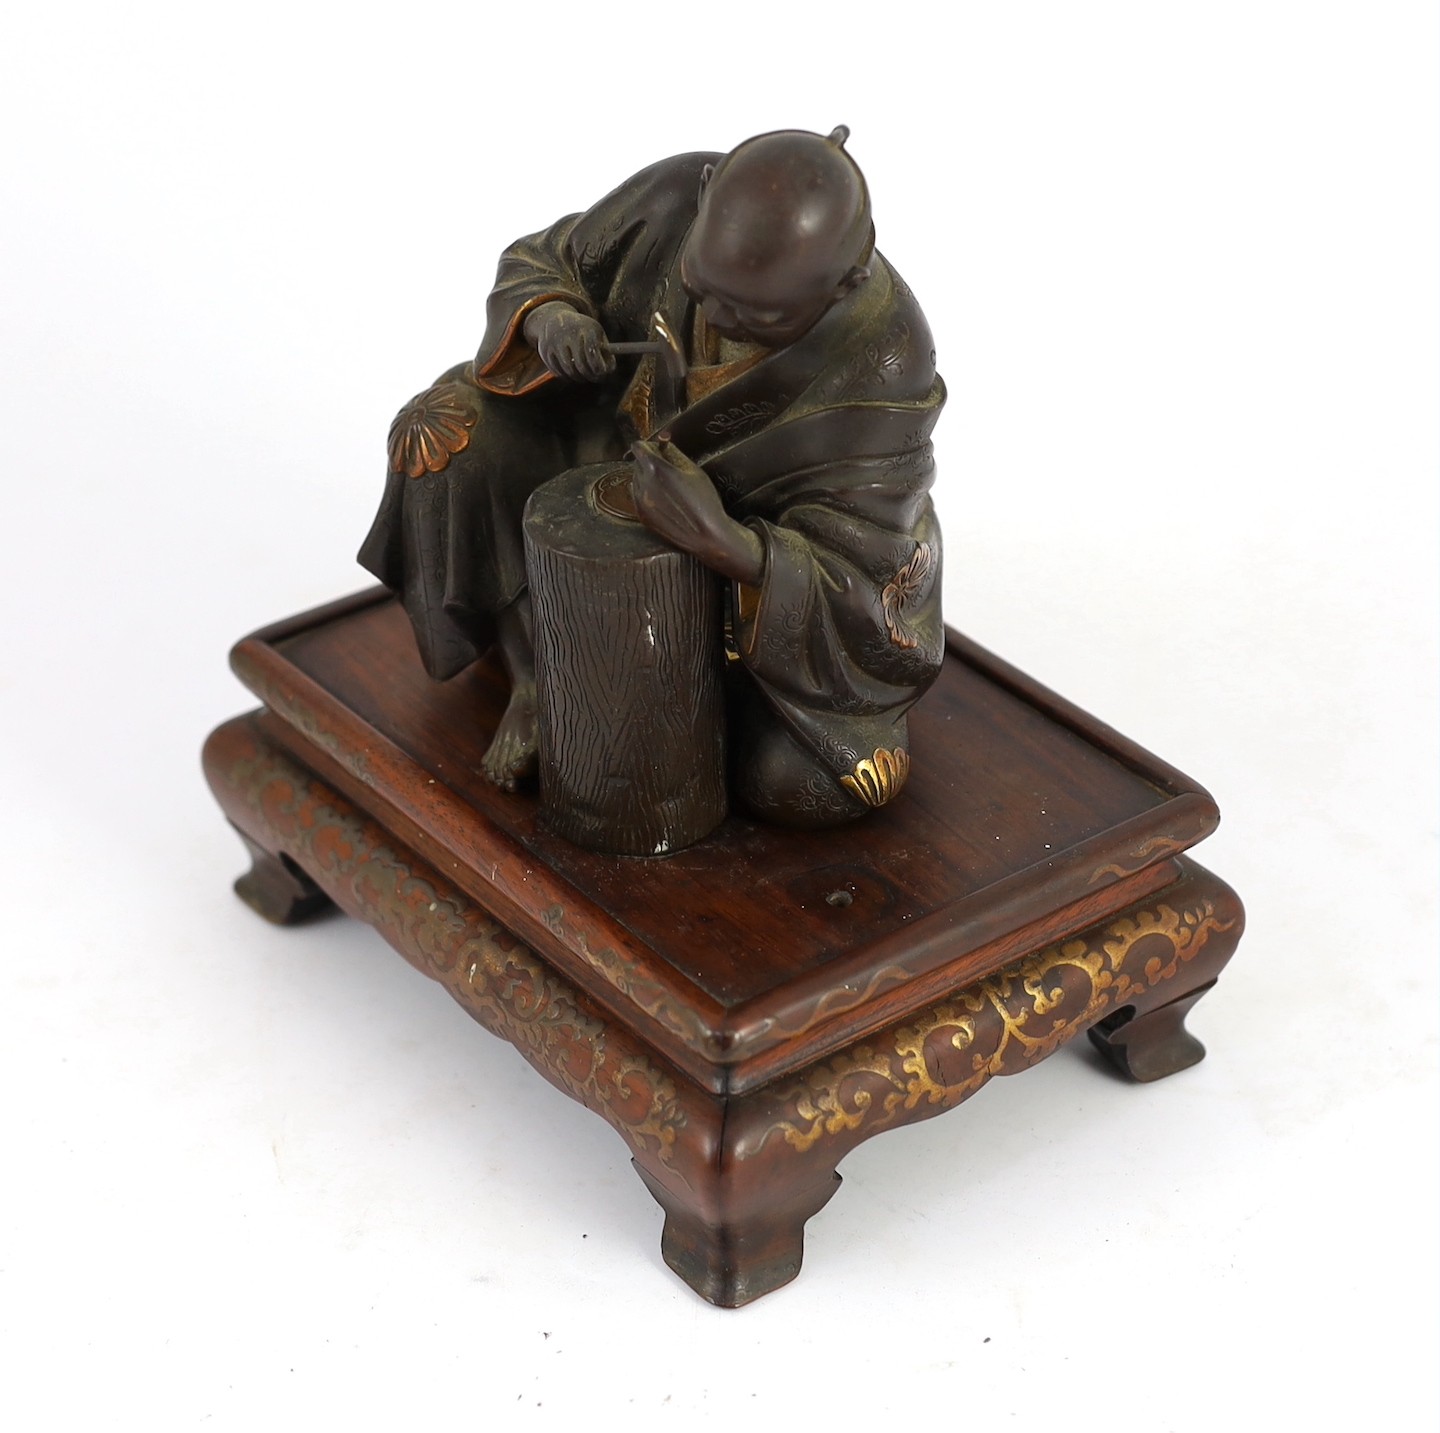 A Japanese bronze model of a sword fittings master craftsman, by Miyao Eisuke, Meiji period, total height 18cm including original gilt lacquered wood stand, small section of bronze lacking